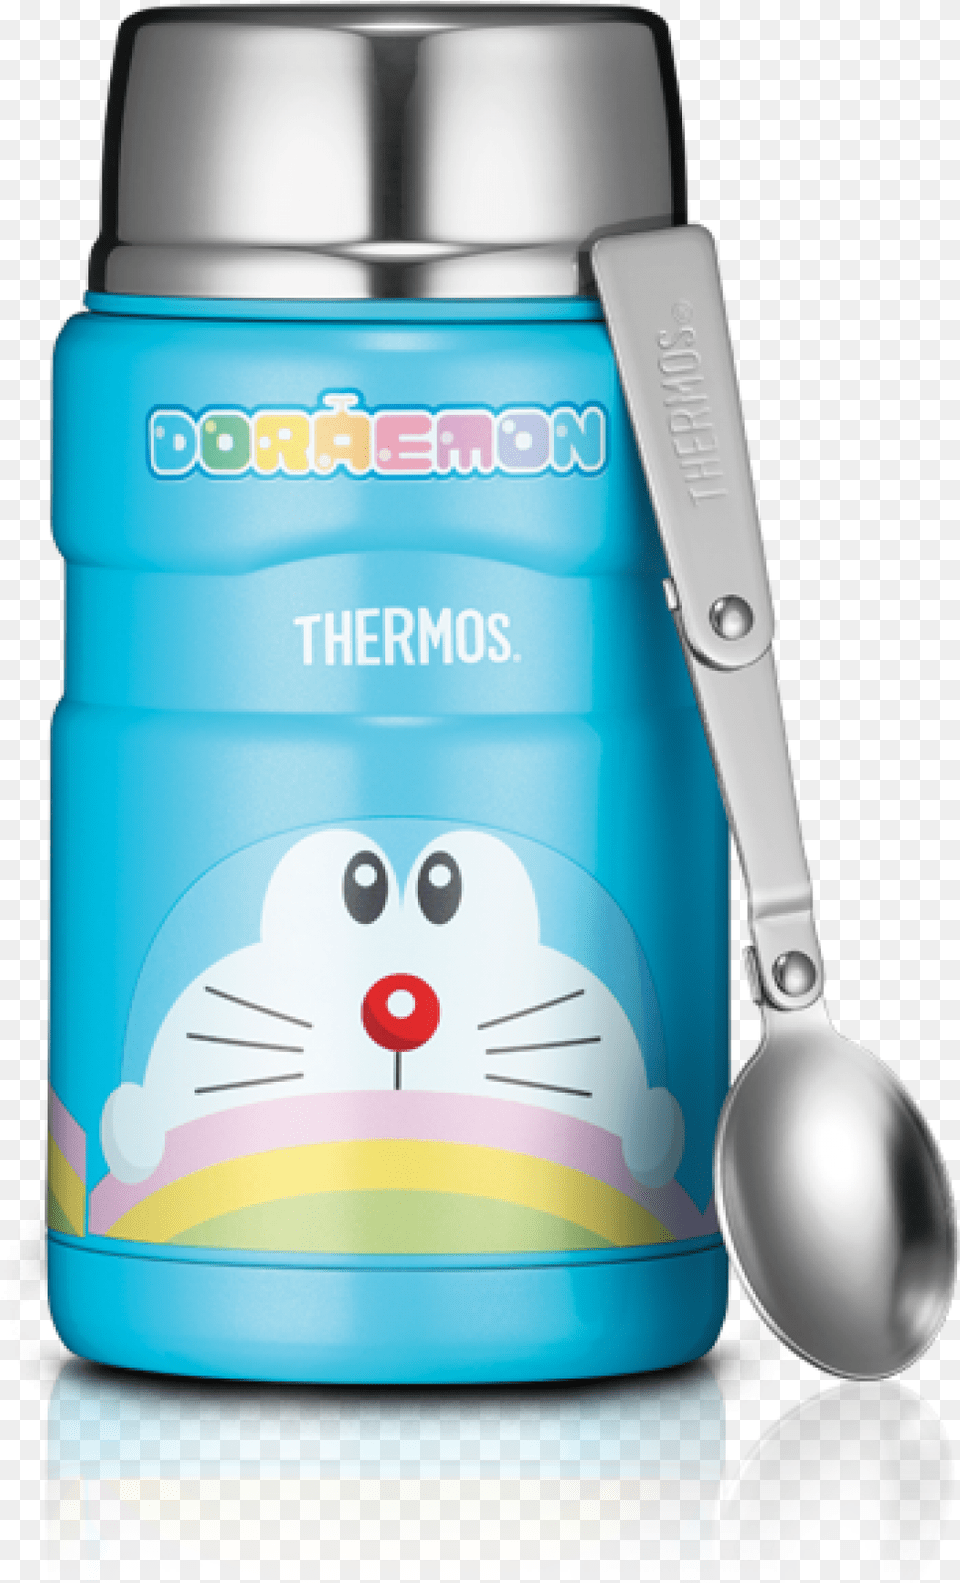 Thermos Doraemon Thermos King Food Jar Doraemon, Cutlery, Spoon, Bottle, Cup Free Transparent Png